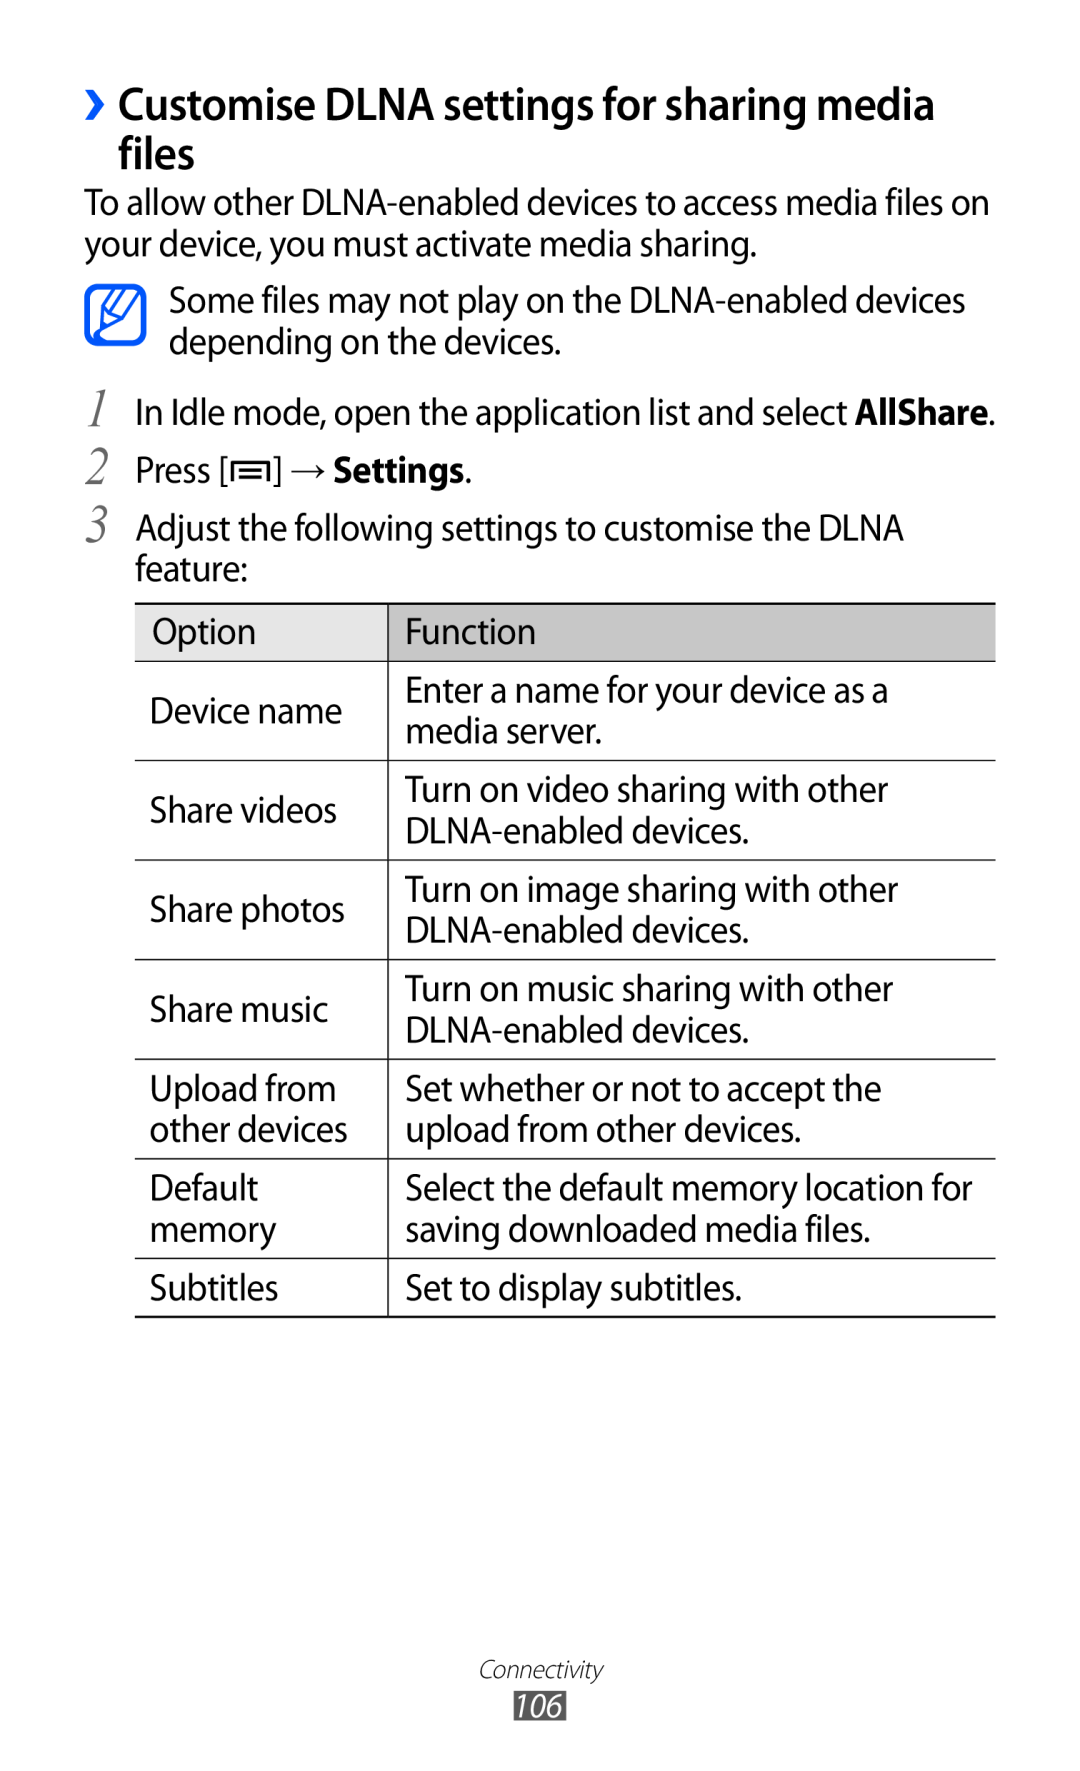 Samsung GT-I9070 user manual ››Customise DLNA settings for sharing media files, Select the default memory location for 